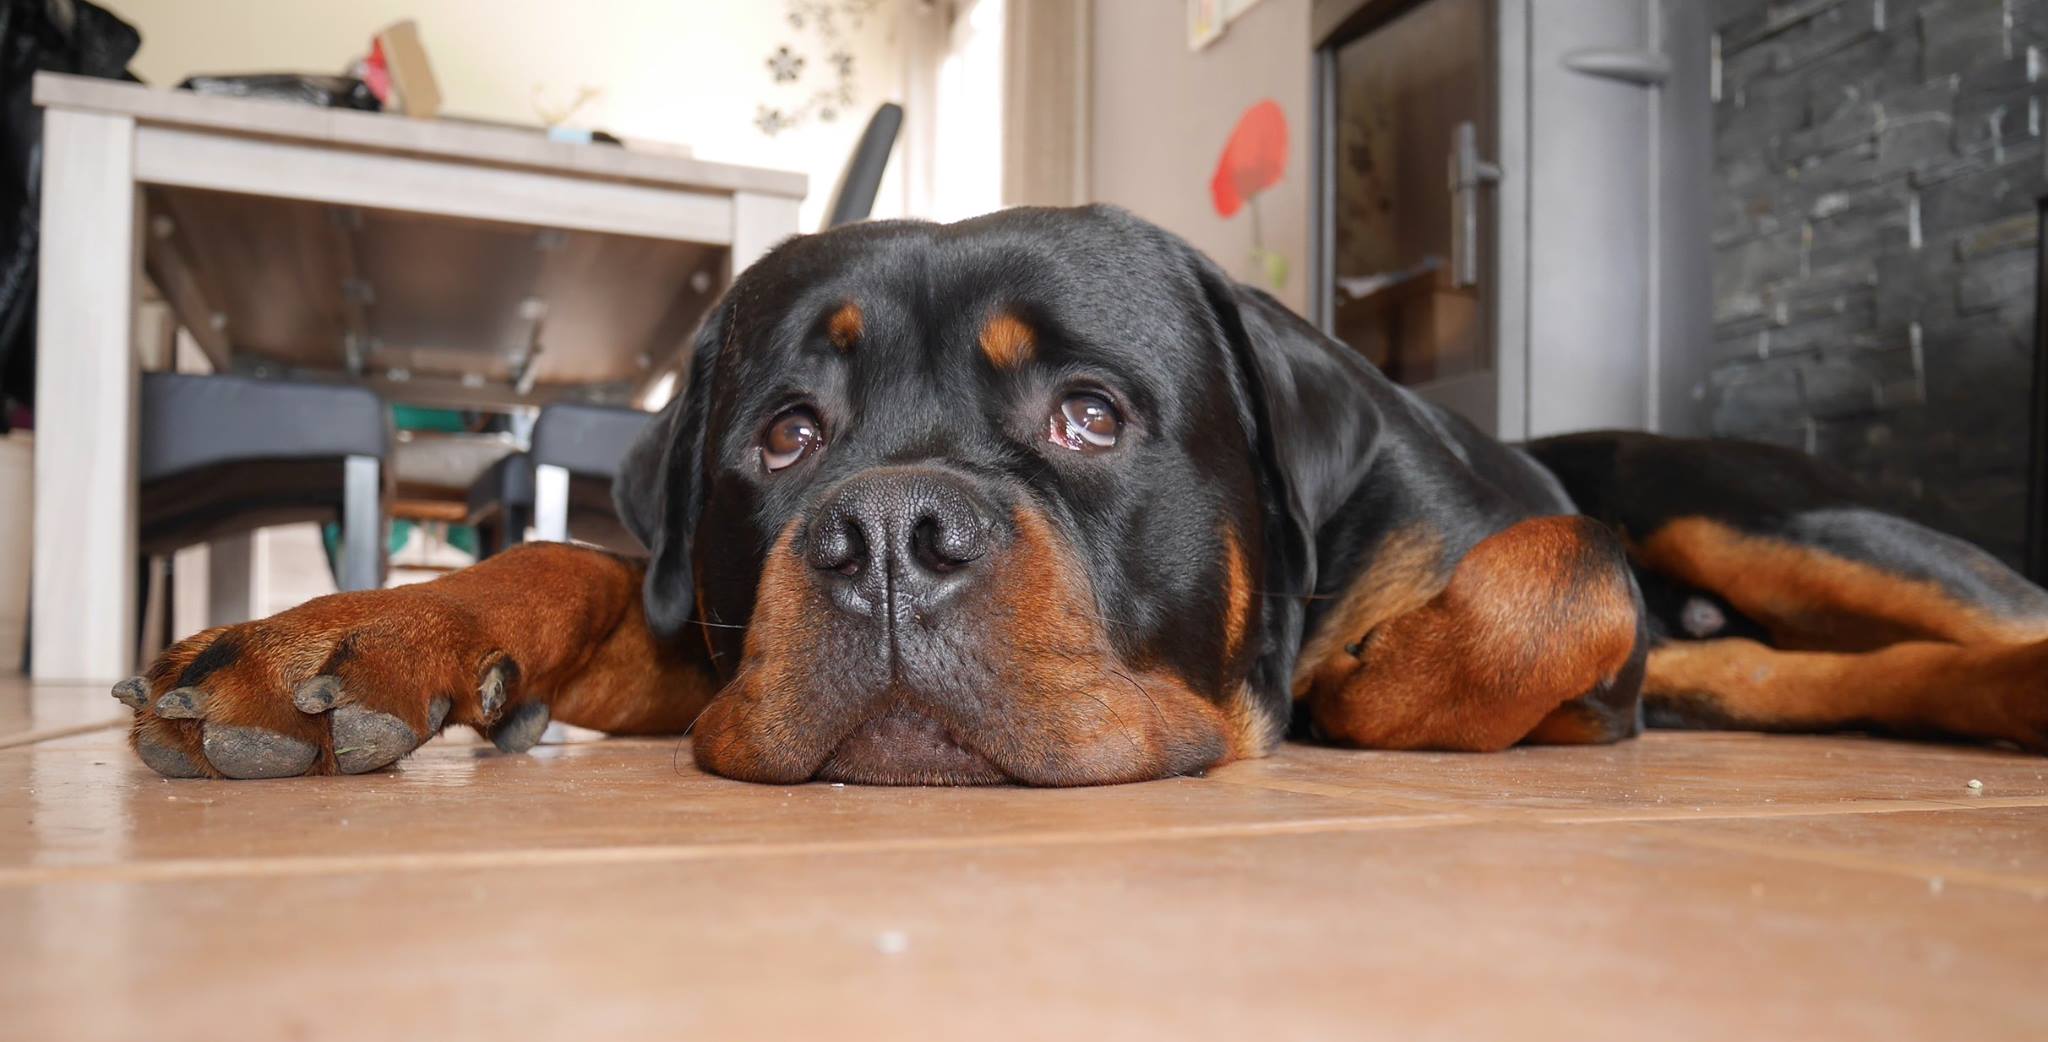 Rottweiler lying down on the floor while looking up with its adorable eyes